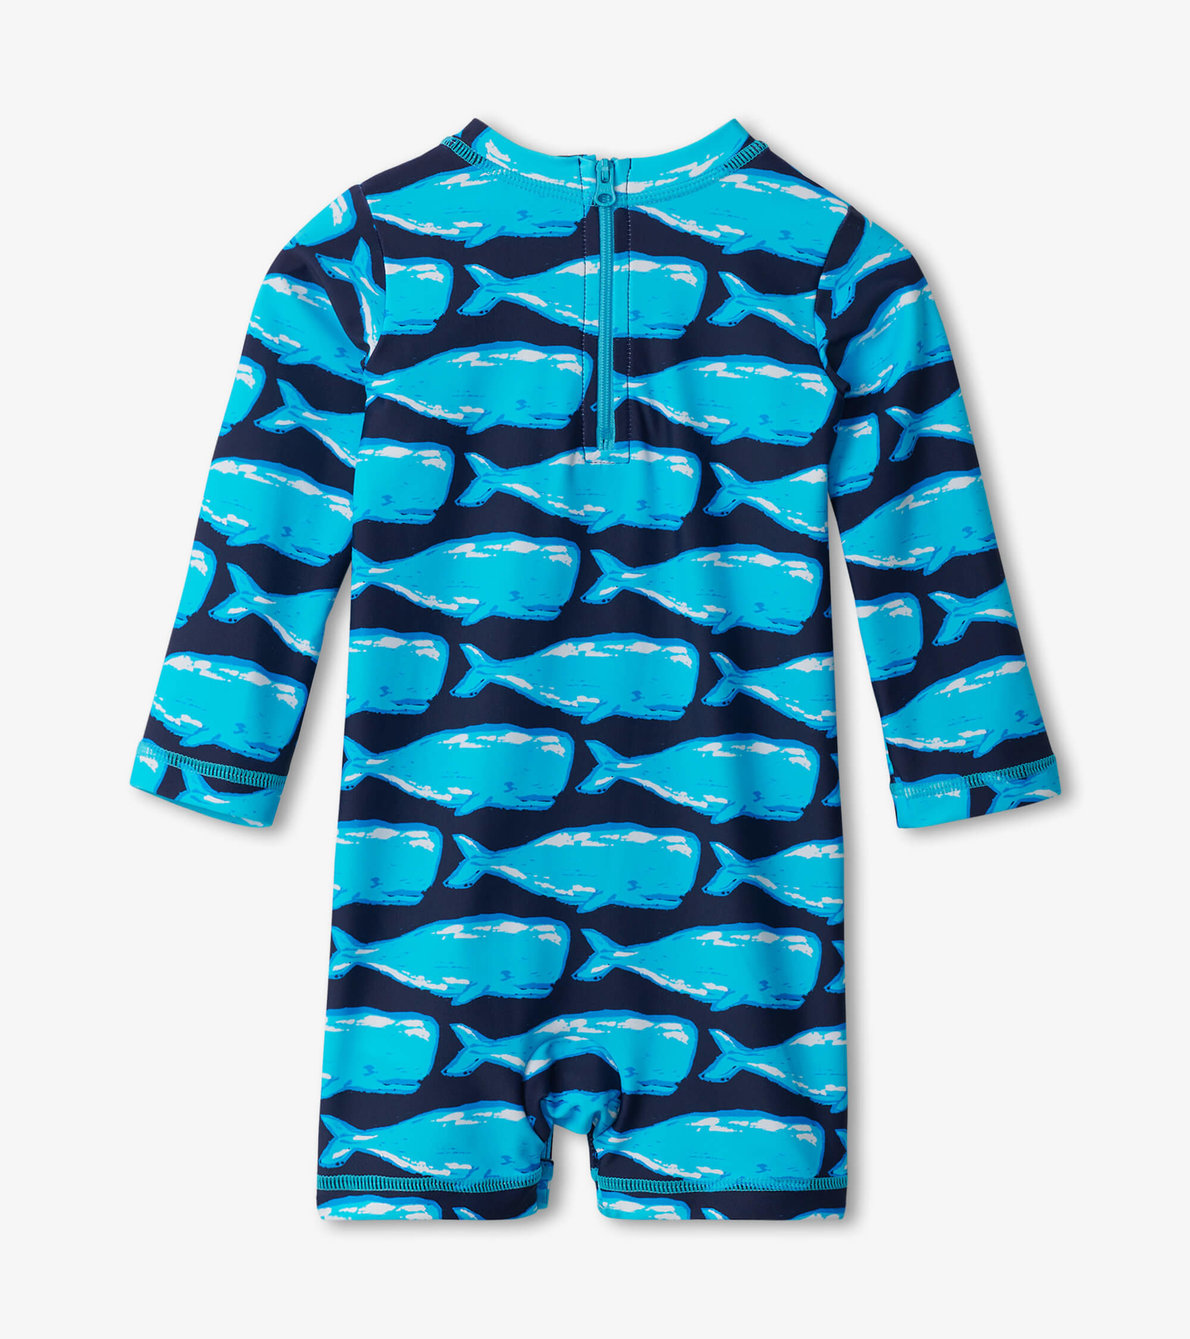 View larger image of Whale Pod Baby One-Piece Rashguard